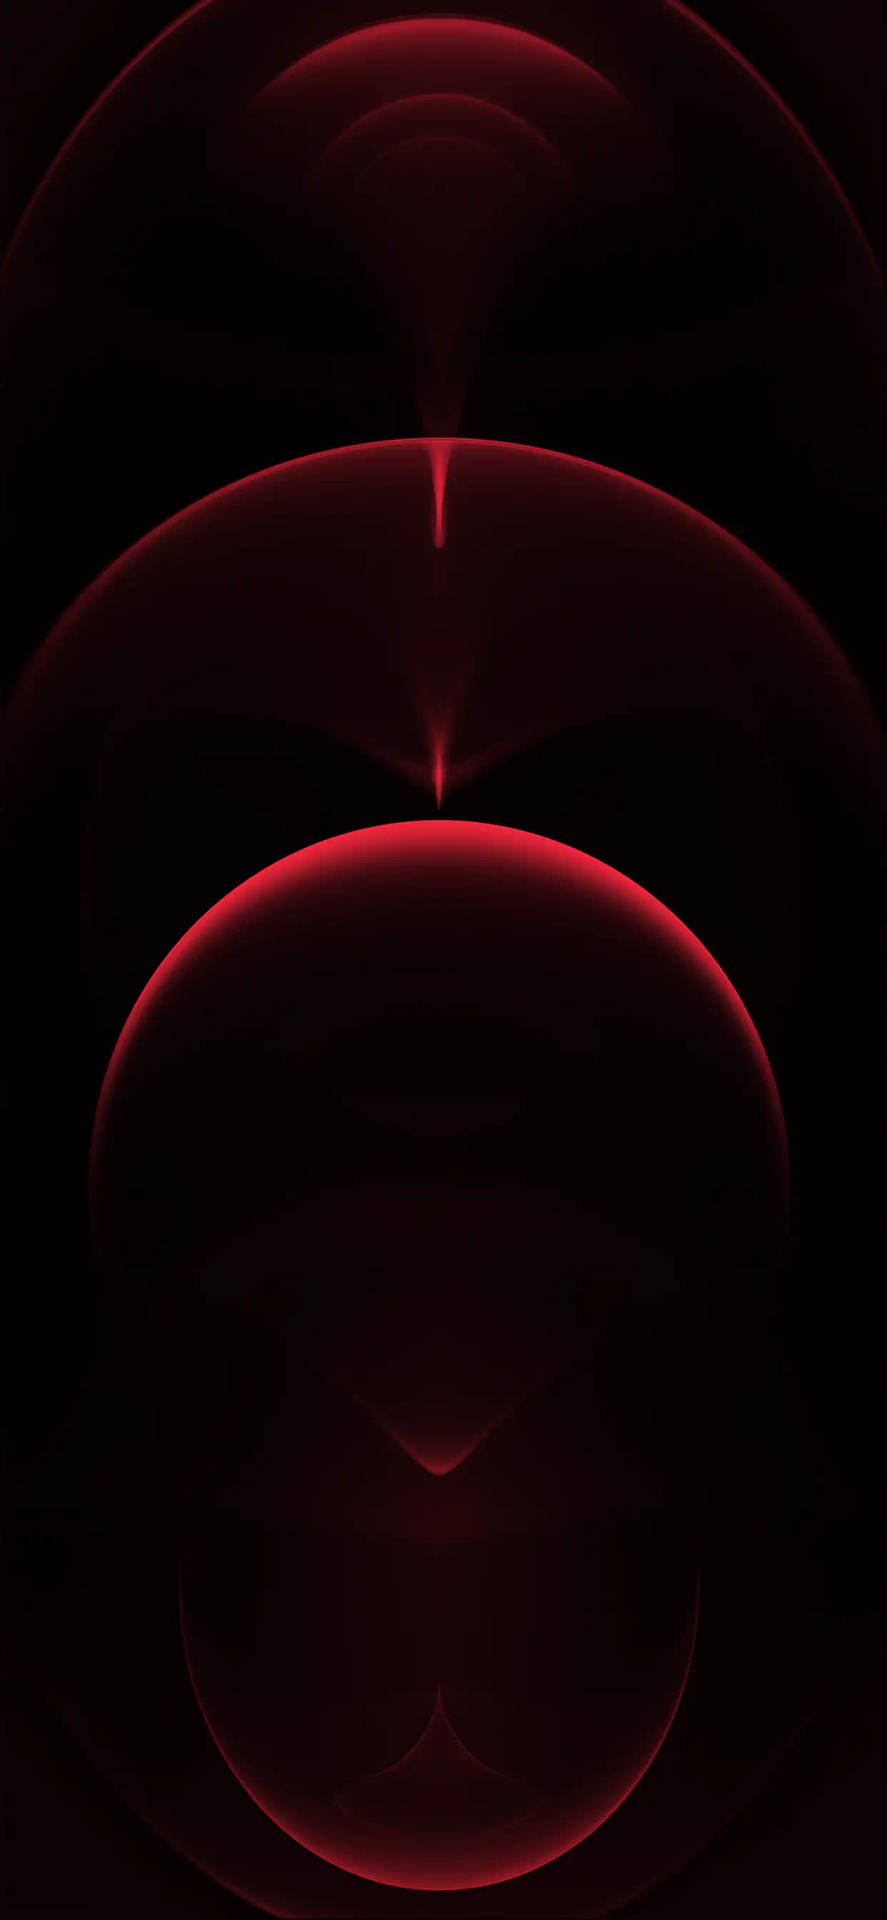 Iphone 11 Pro Red Circles Wallpaper